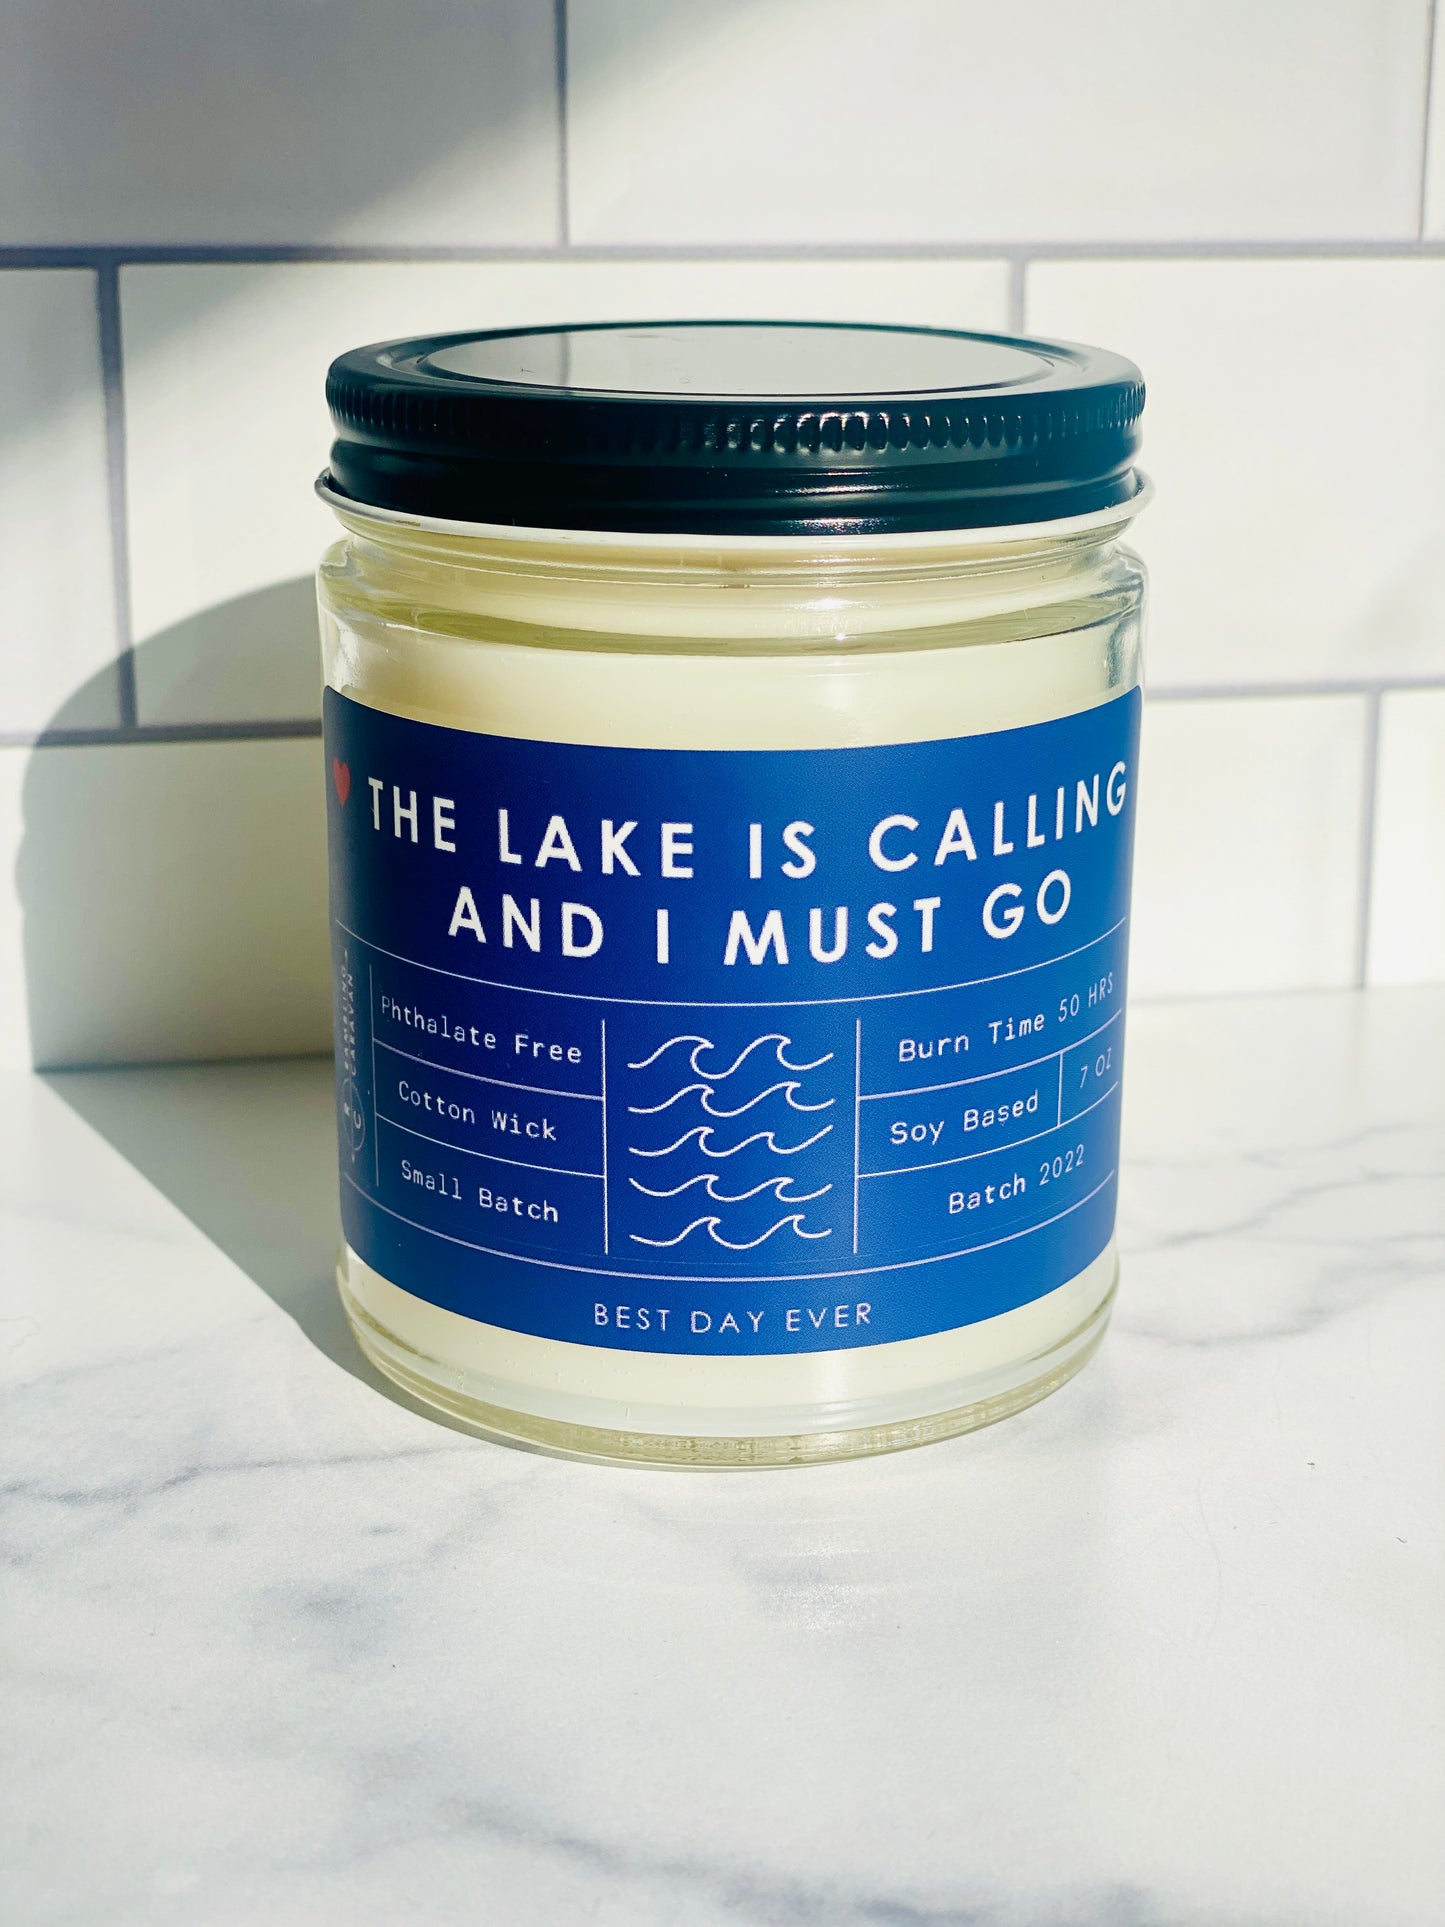 The Lake Is Calling And I Must Go Candle